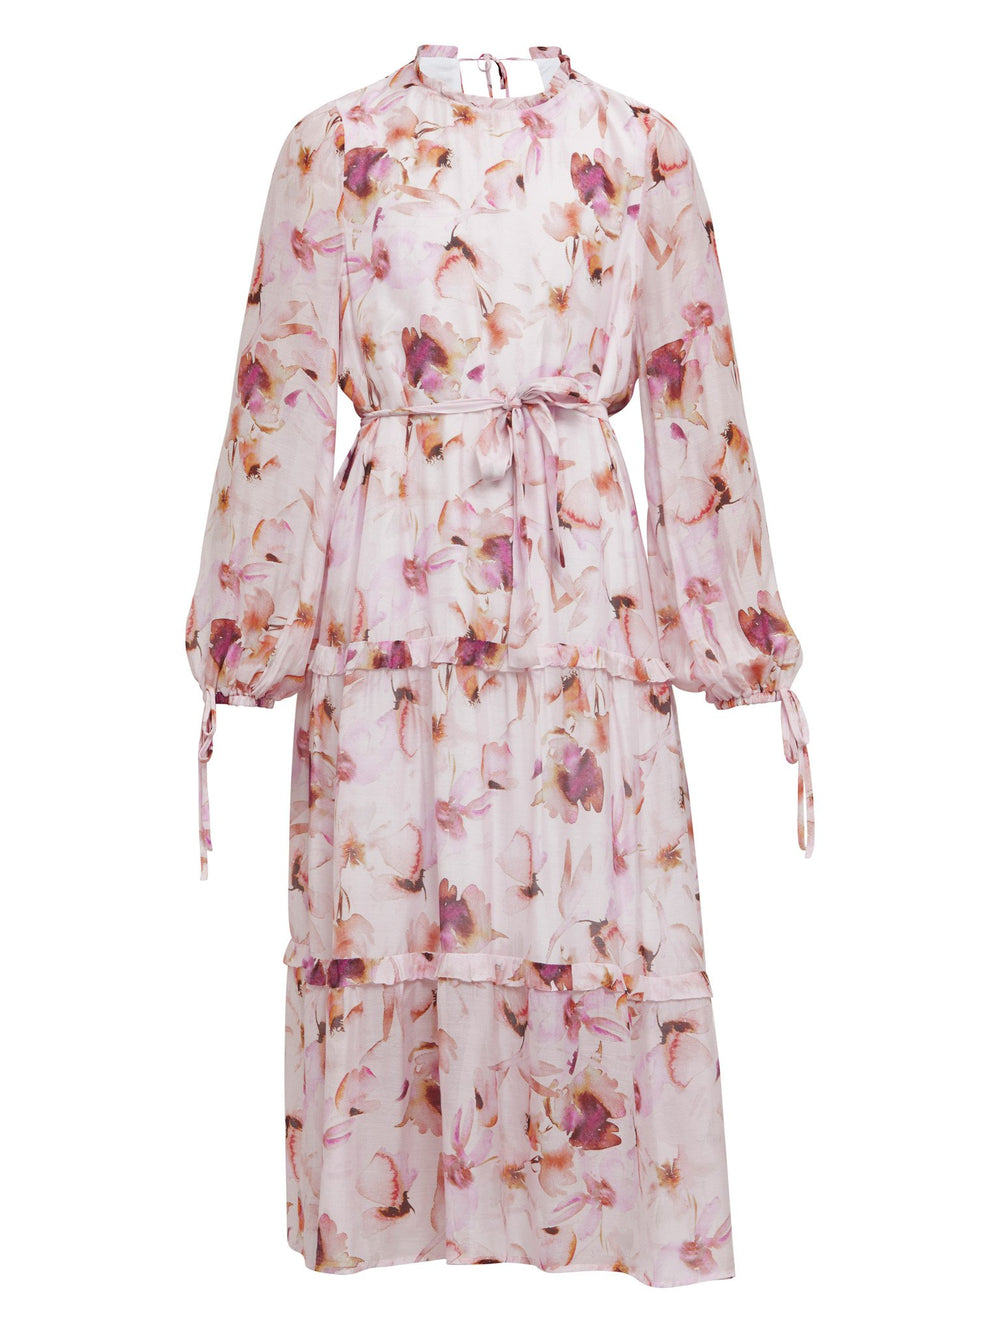 Meet Flo, a super feminine silhouette with pleated jewel neckline, keyhole back, full sleeves that fall to an elasticated cuff with tie detail. Tiered skirt falls to below the knee. The dress can be worn with or without the belt. Crafted in our super soft silk in a delicate watercolour floral print. Perfect for summer weddings, garden parties or wherever you'd like to make an entrance.